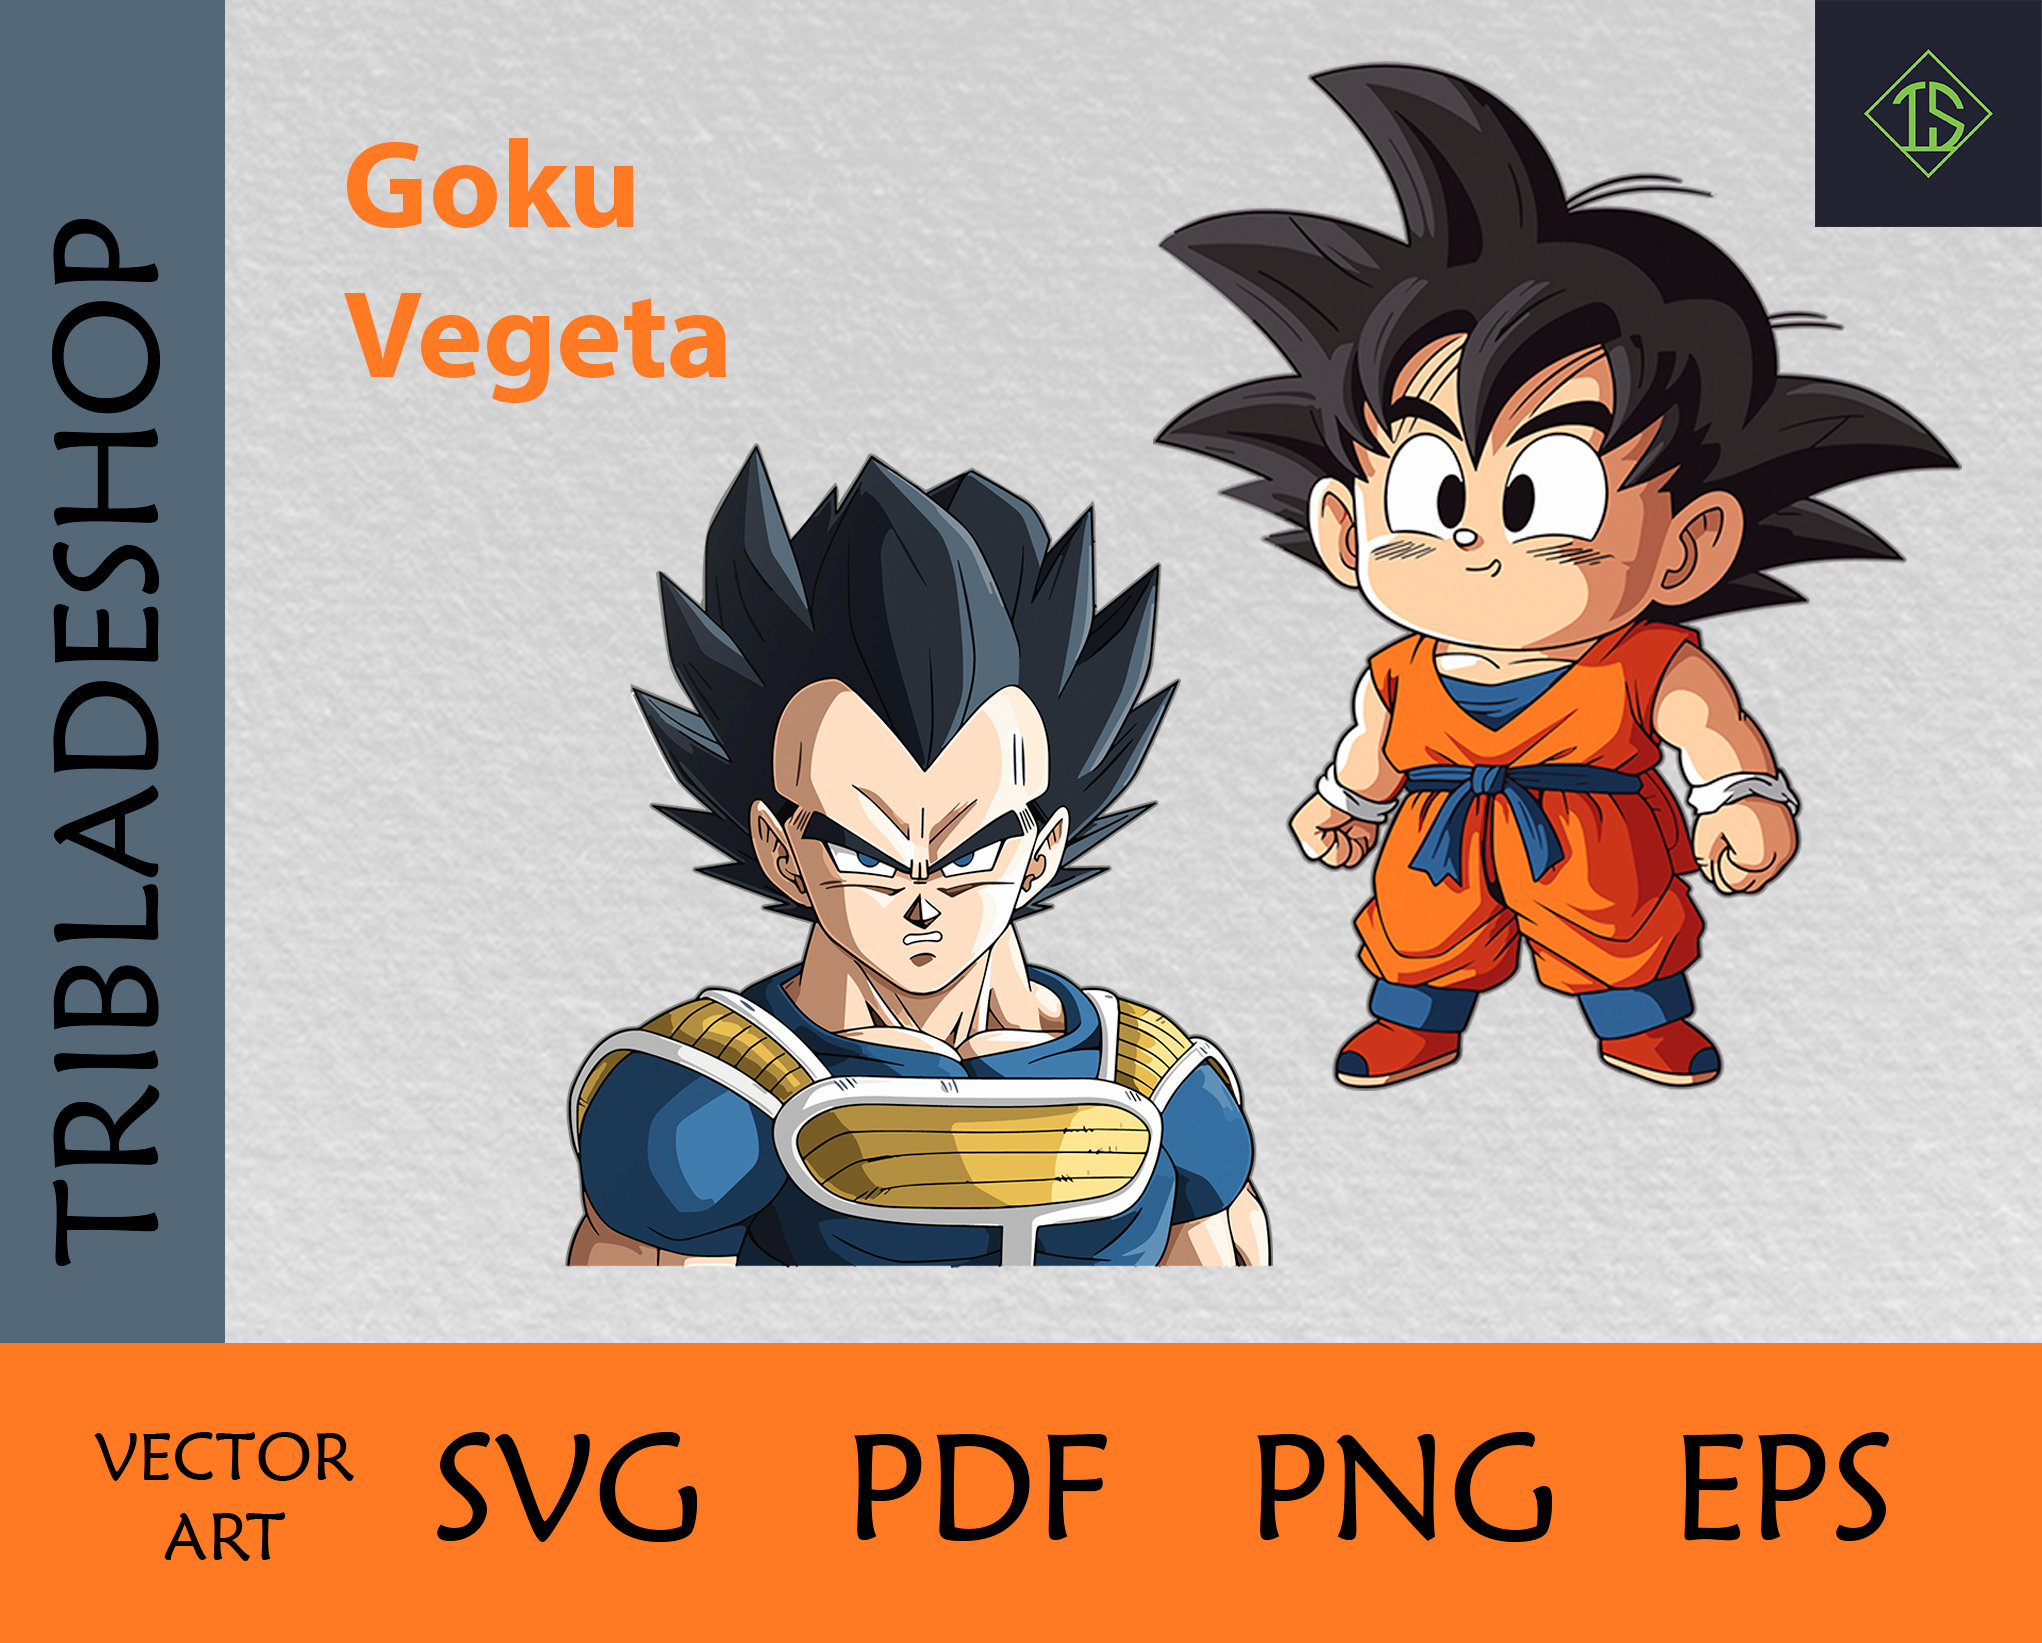 Dragon Ball Z Svg, Dxf, Eps, Png, Clipart, Silhouette and Cutfiles #3